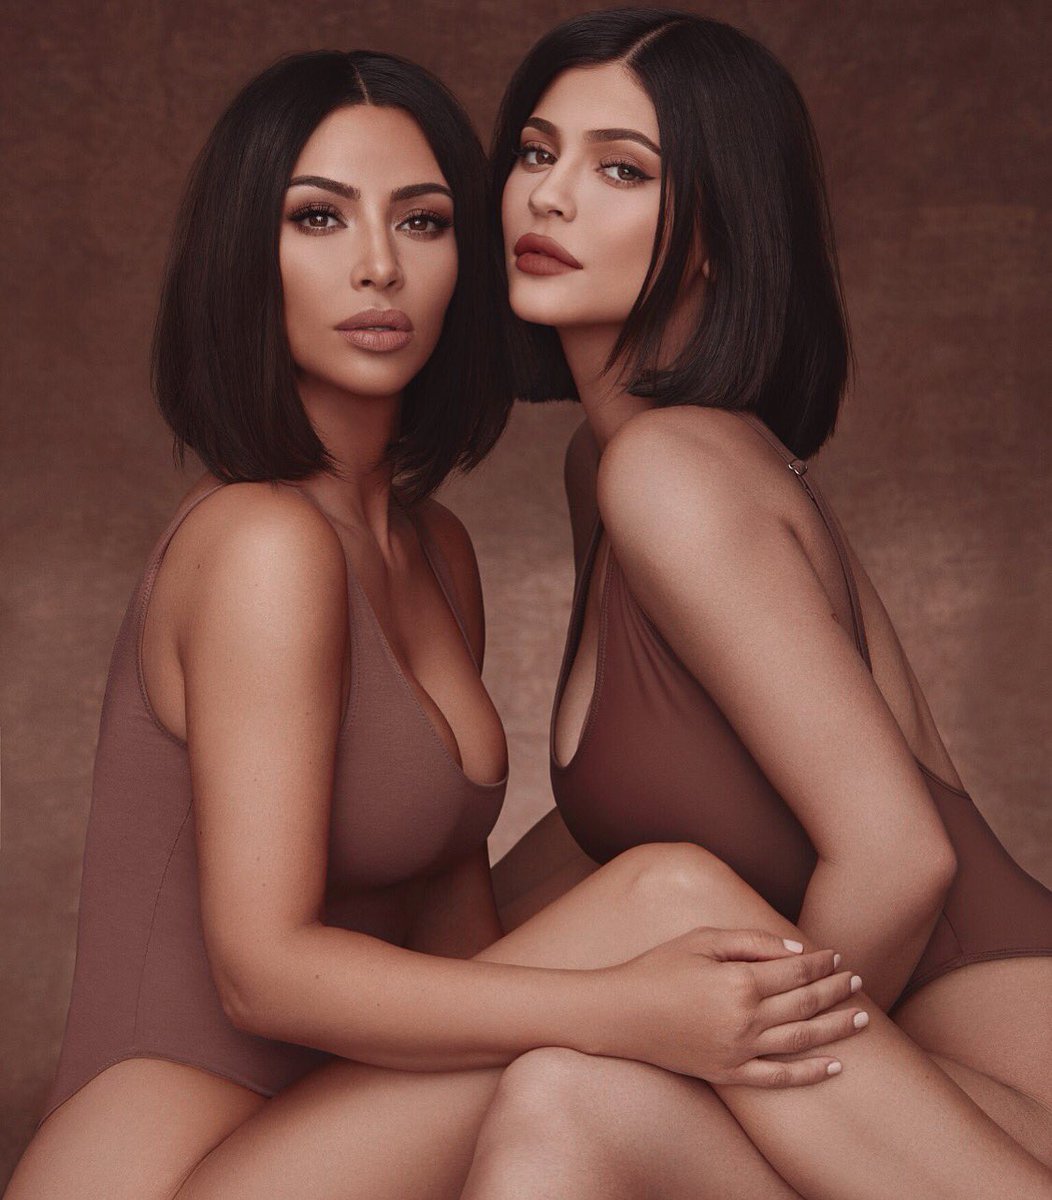 KKW X KYLIE 2 COMING TO kyliecosmetics.com BLACK FRIDAY